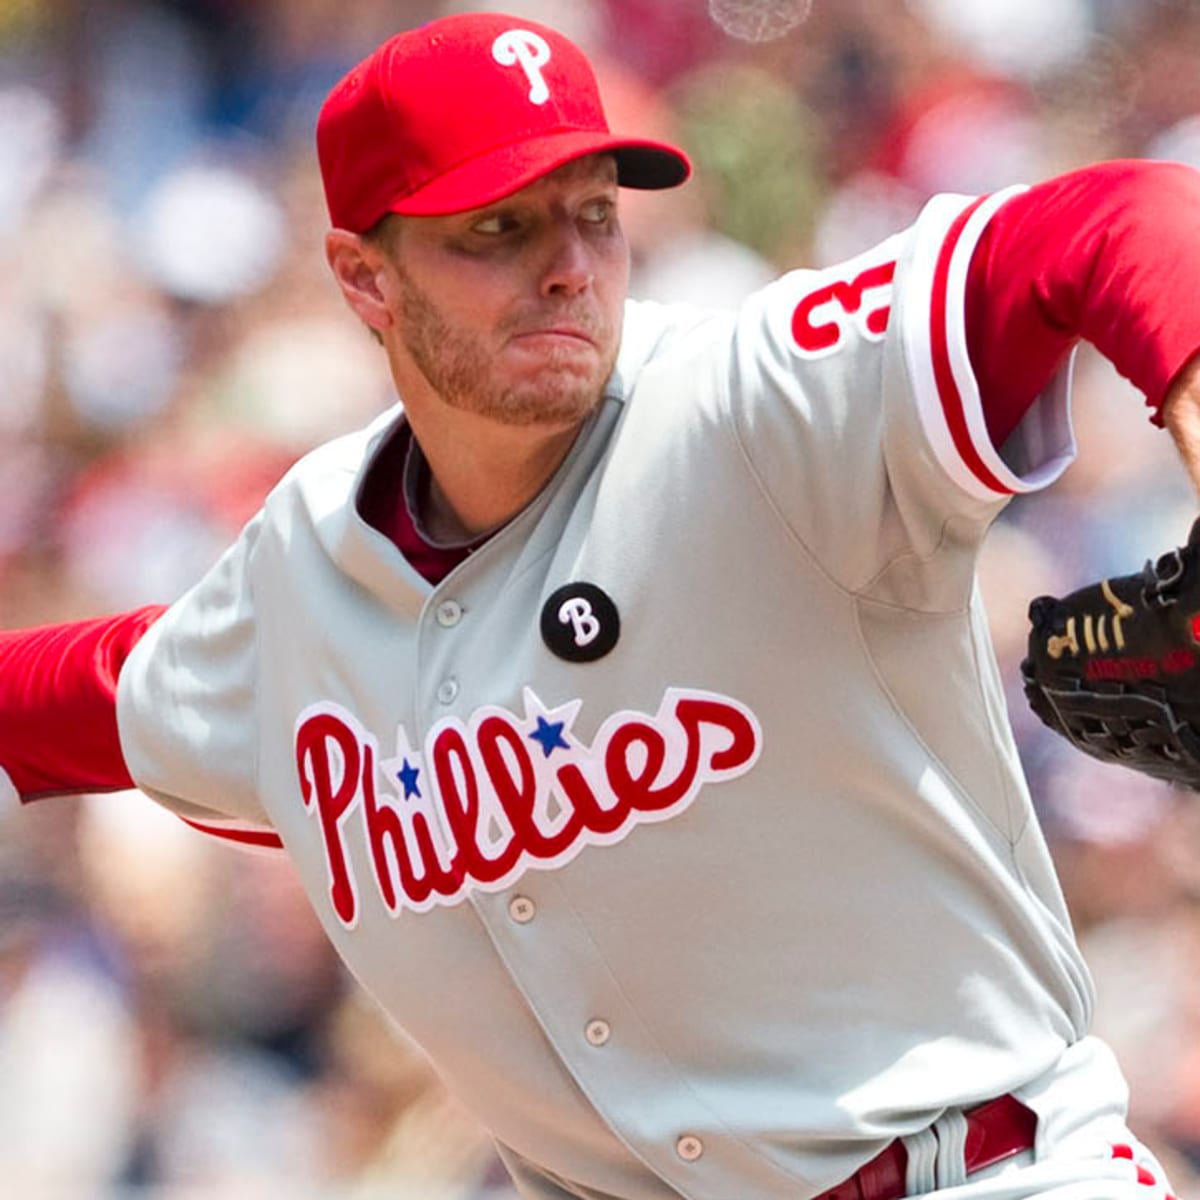 MLB - Roy Halladay has been elected to the Hall of Fame.